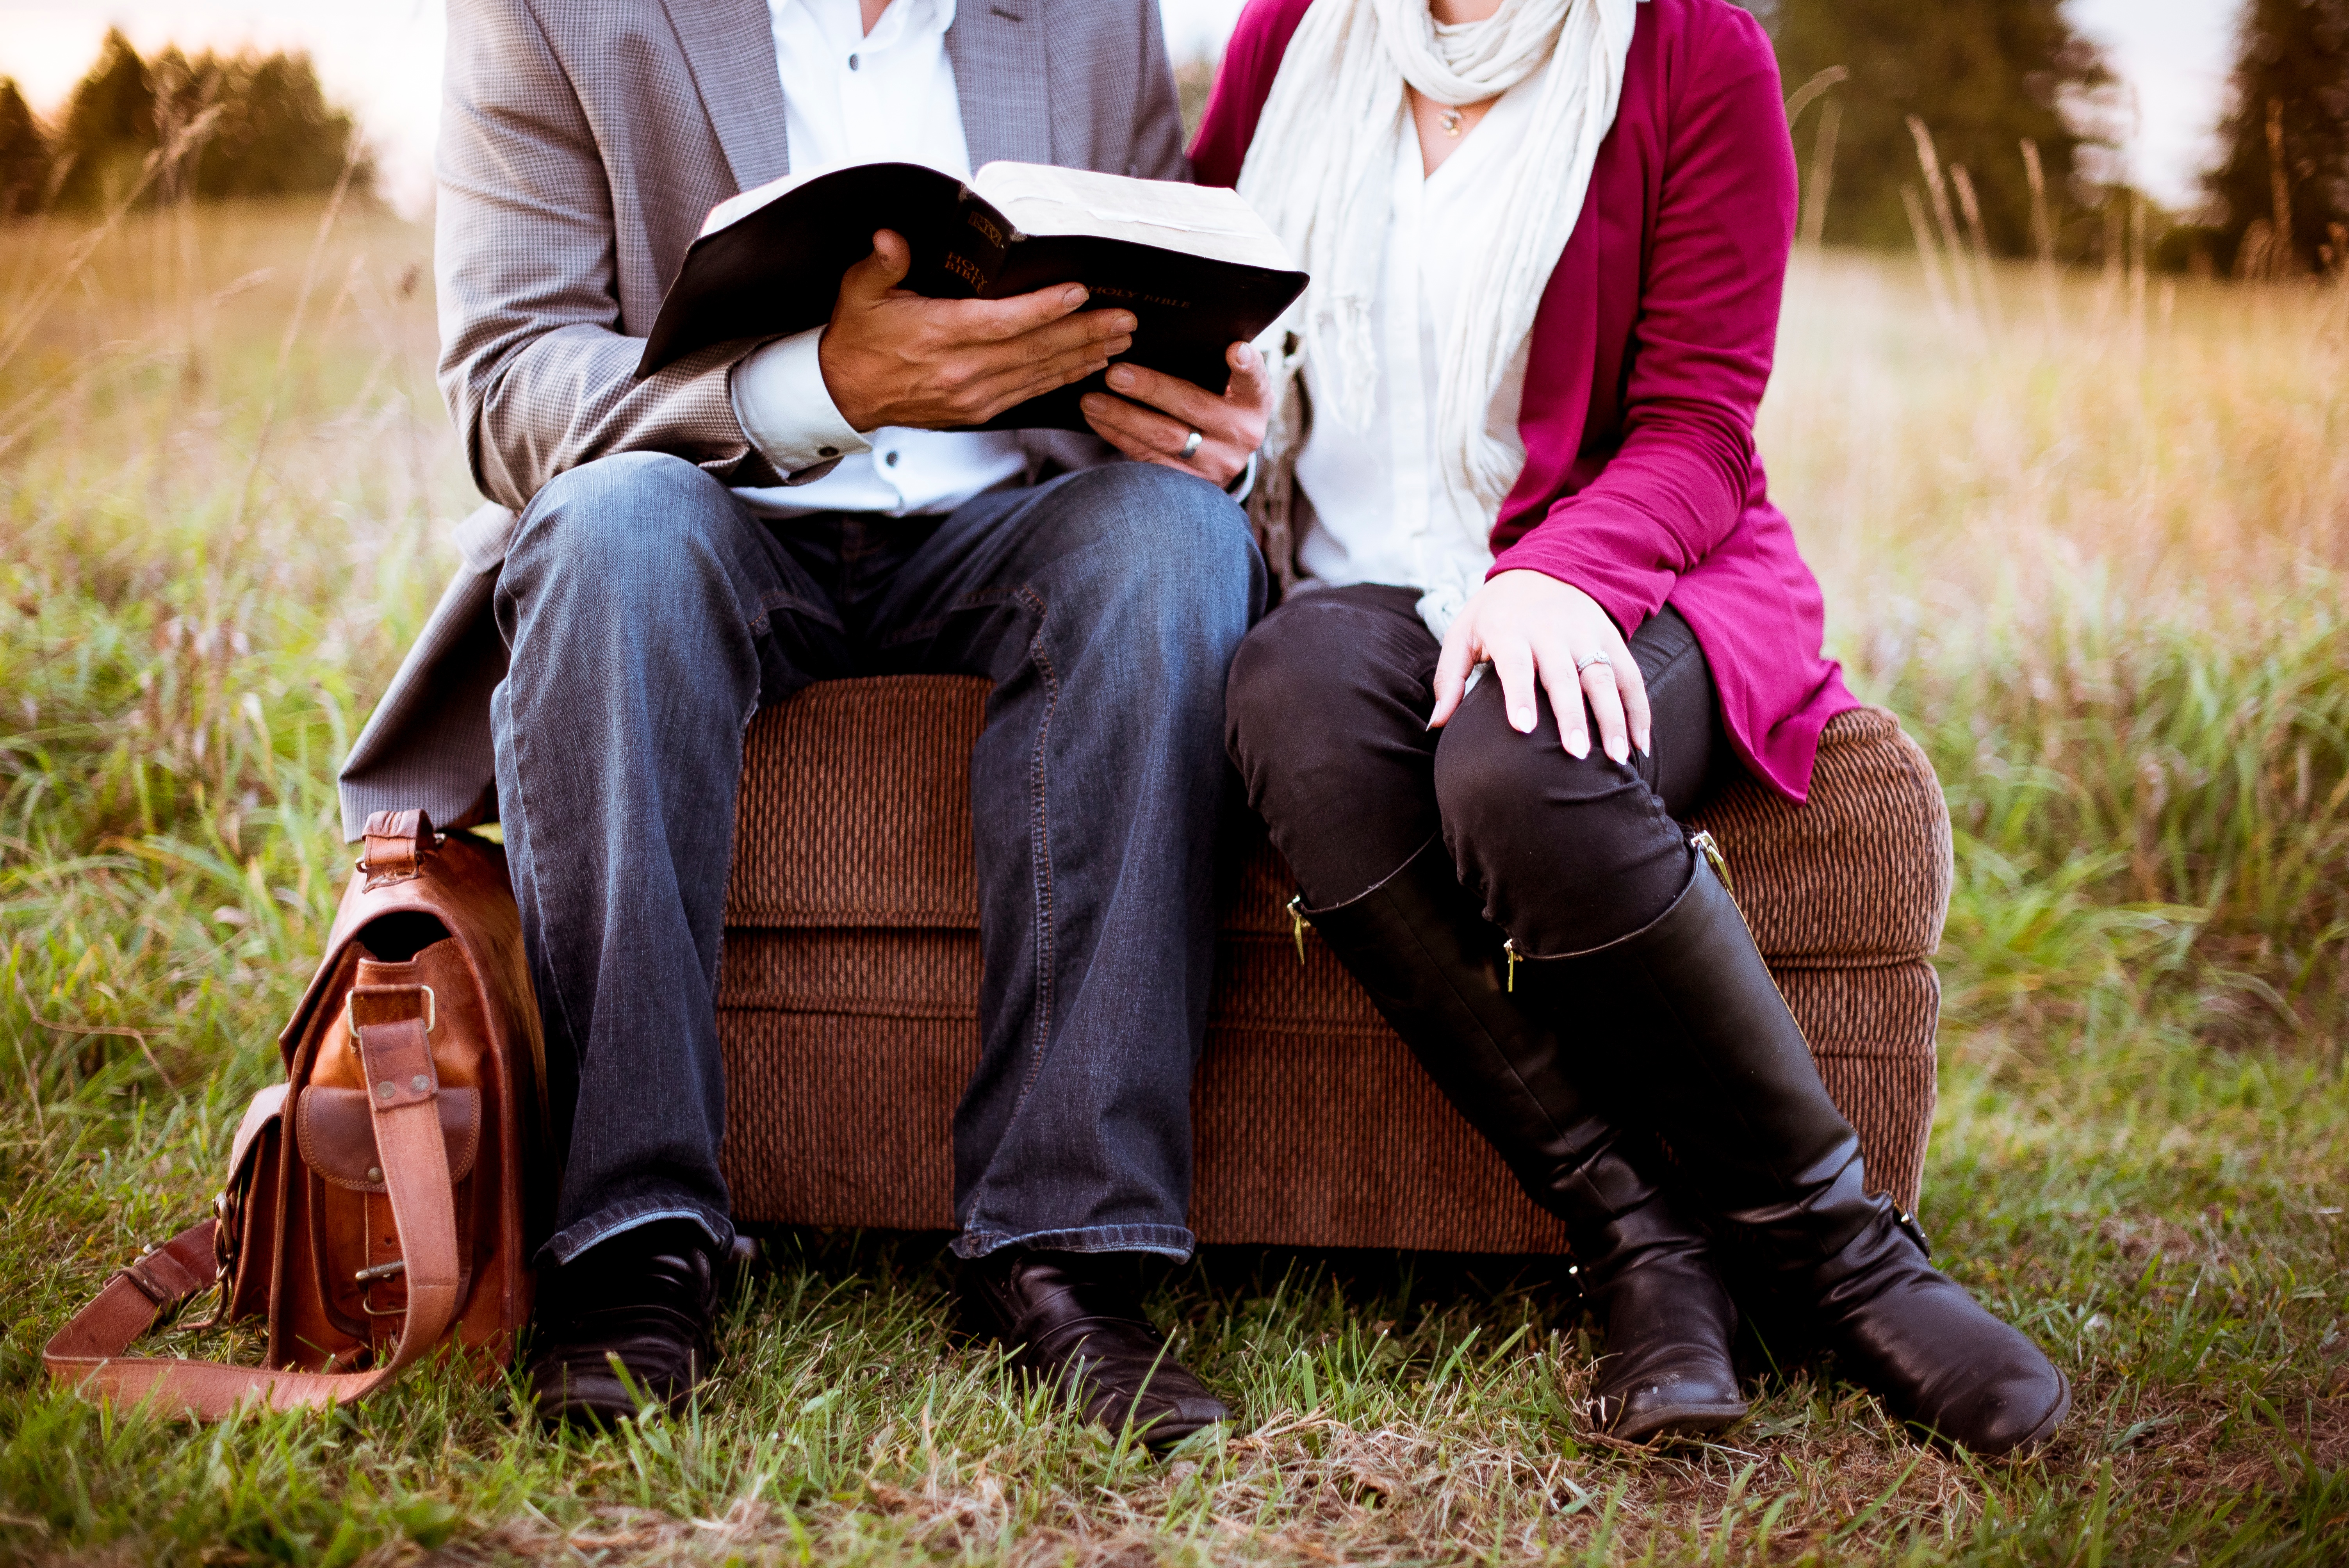 Couple read together in a field